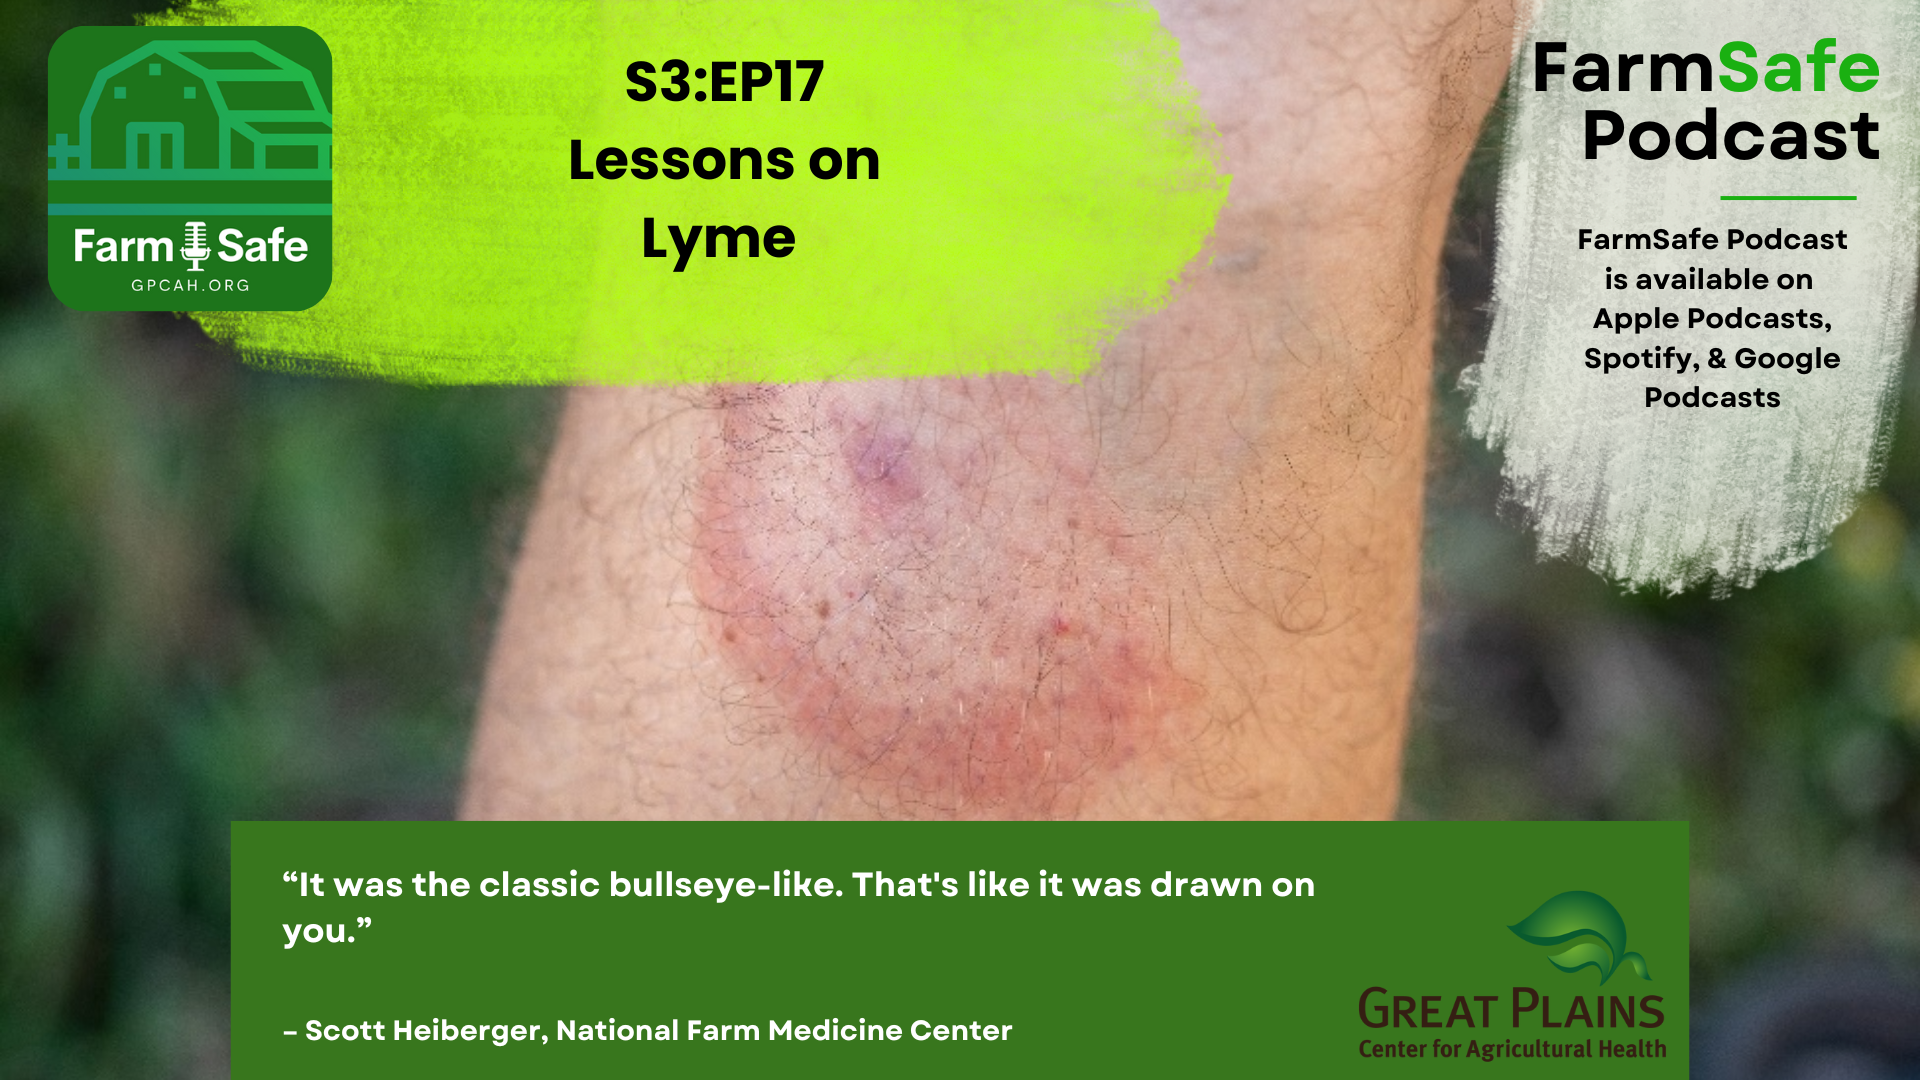 FarmSafe podcast topic - Lessons on Lyme Disease